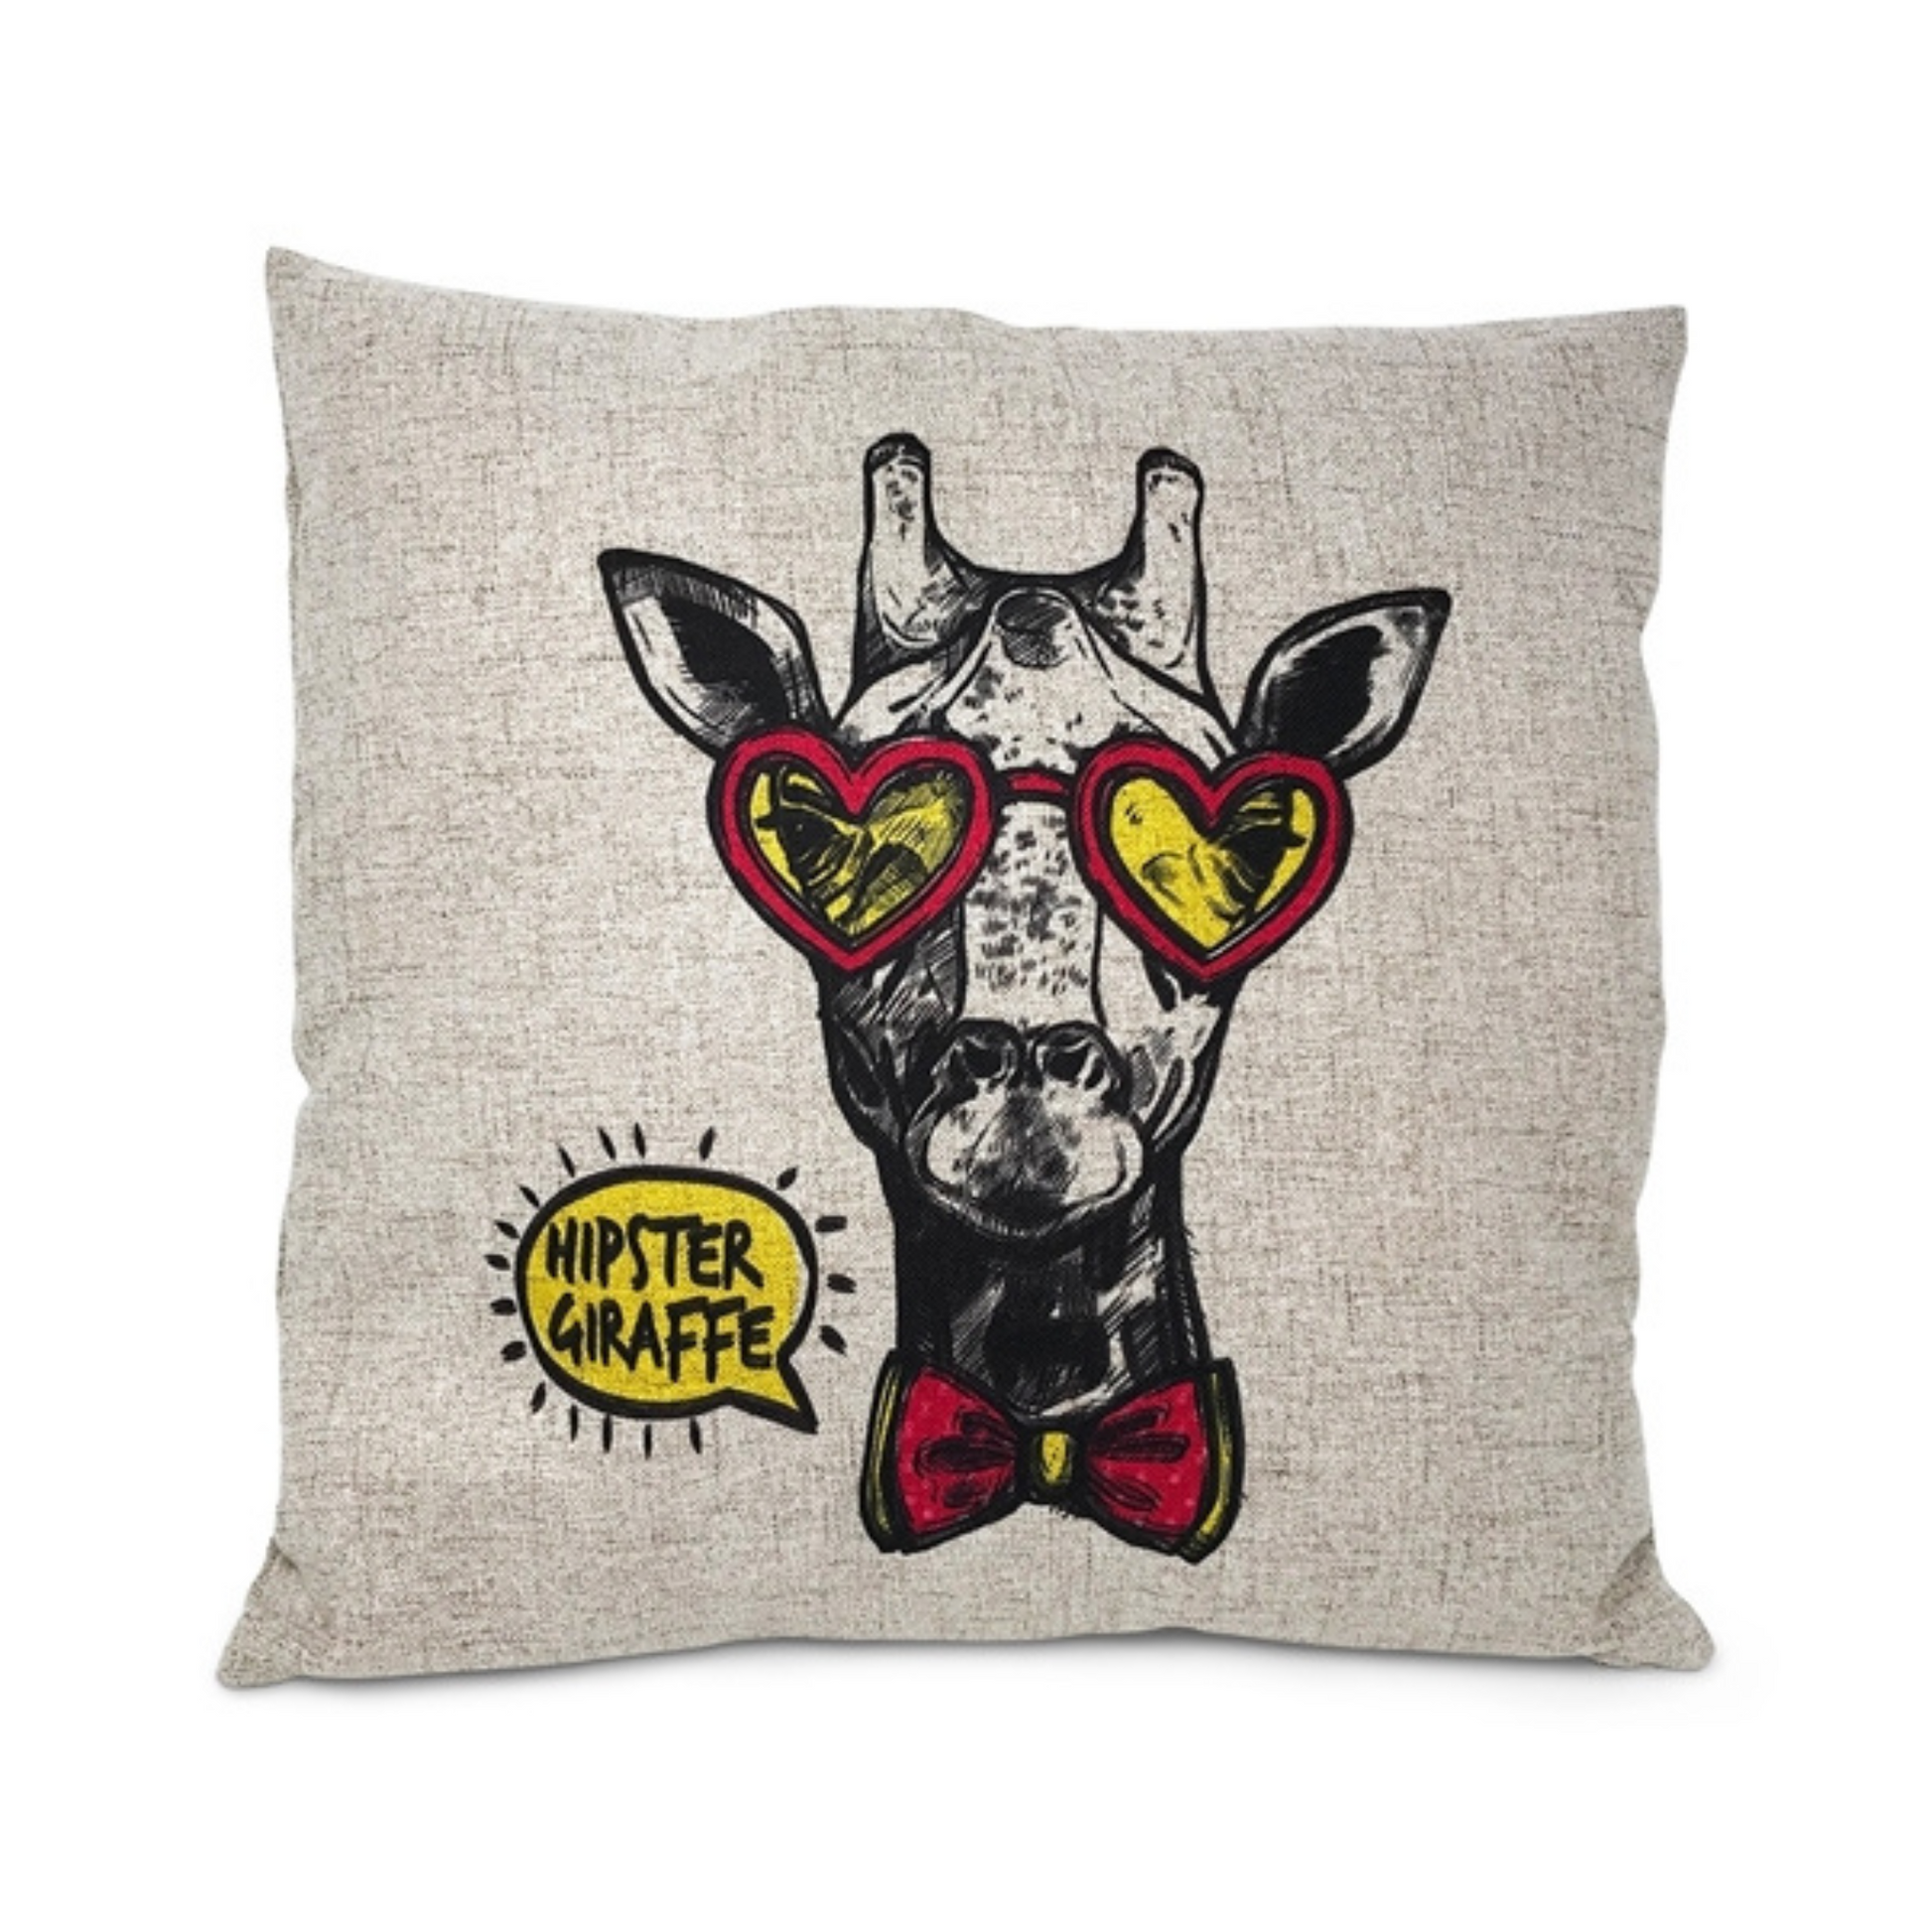 Personalised Cushion Cover 40cm x 40cm - Hipster Giraffe 